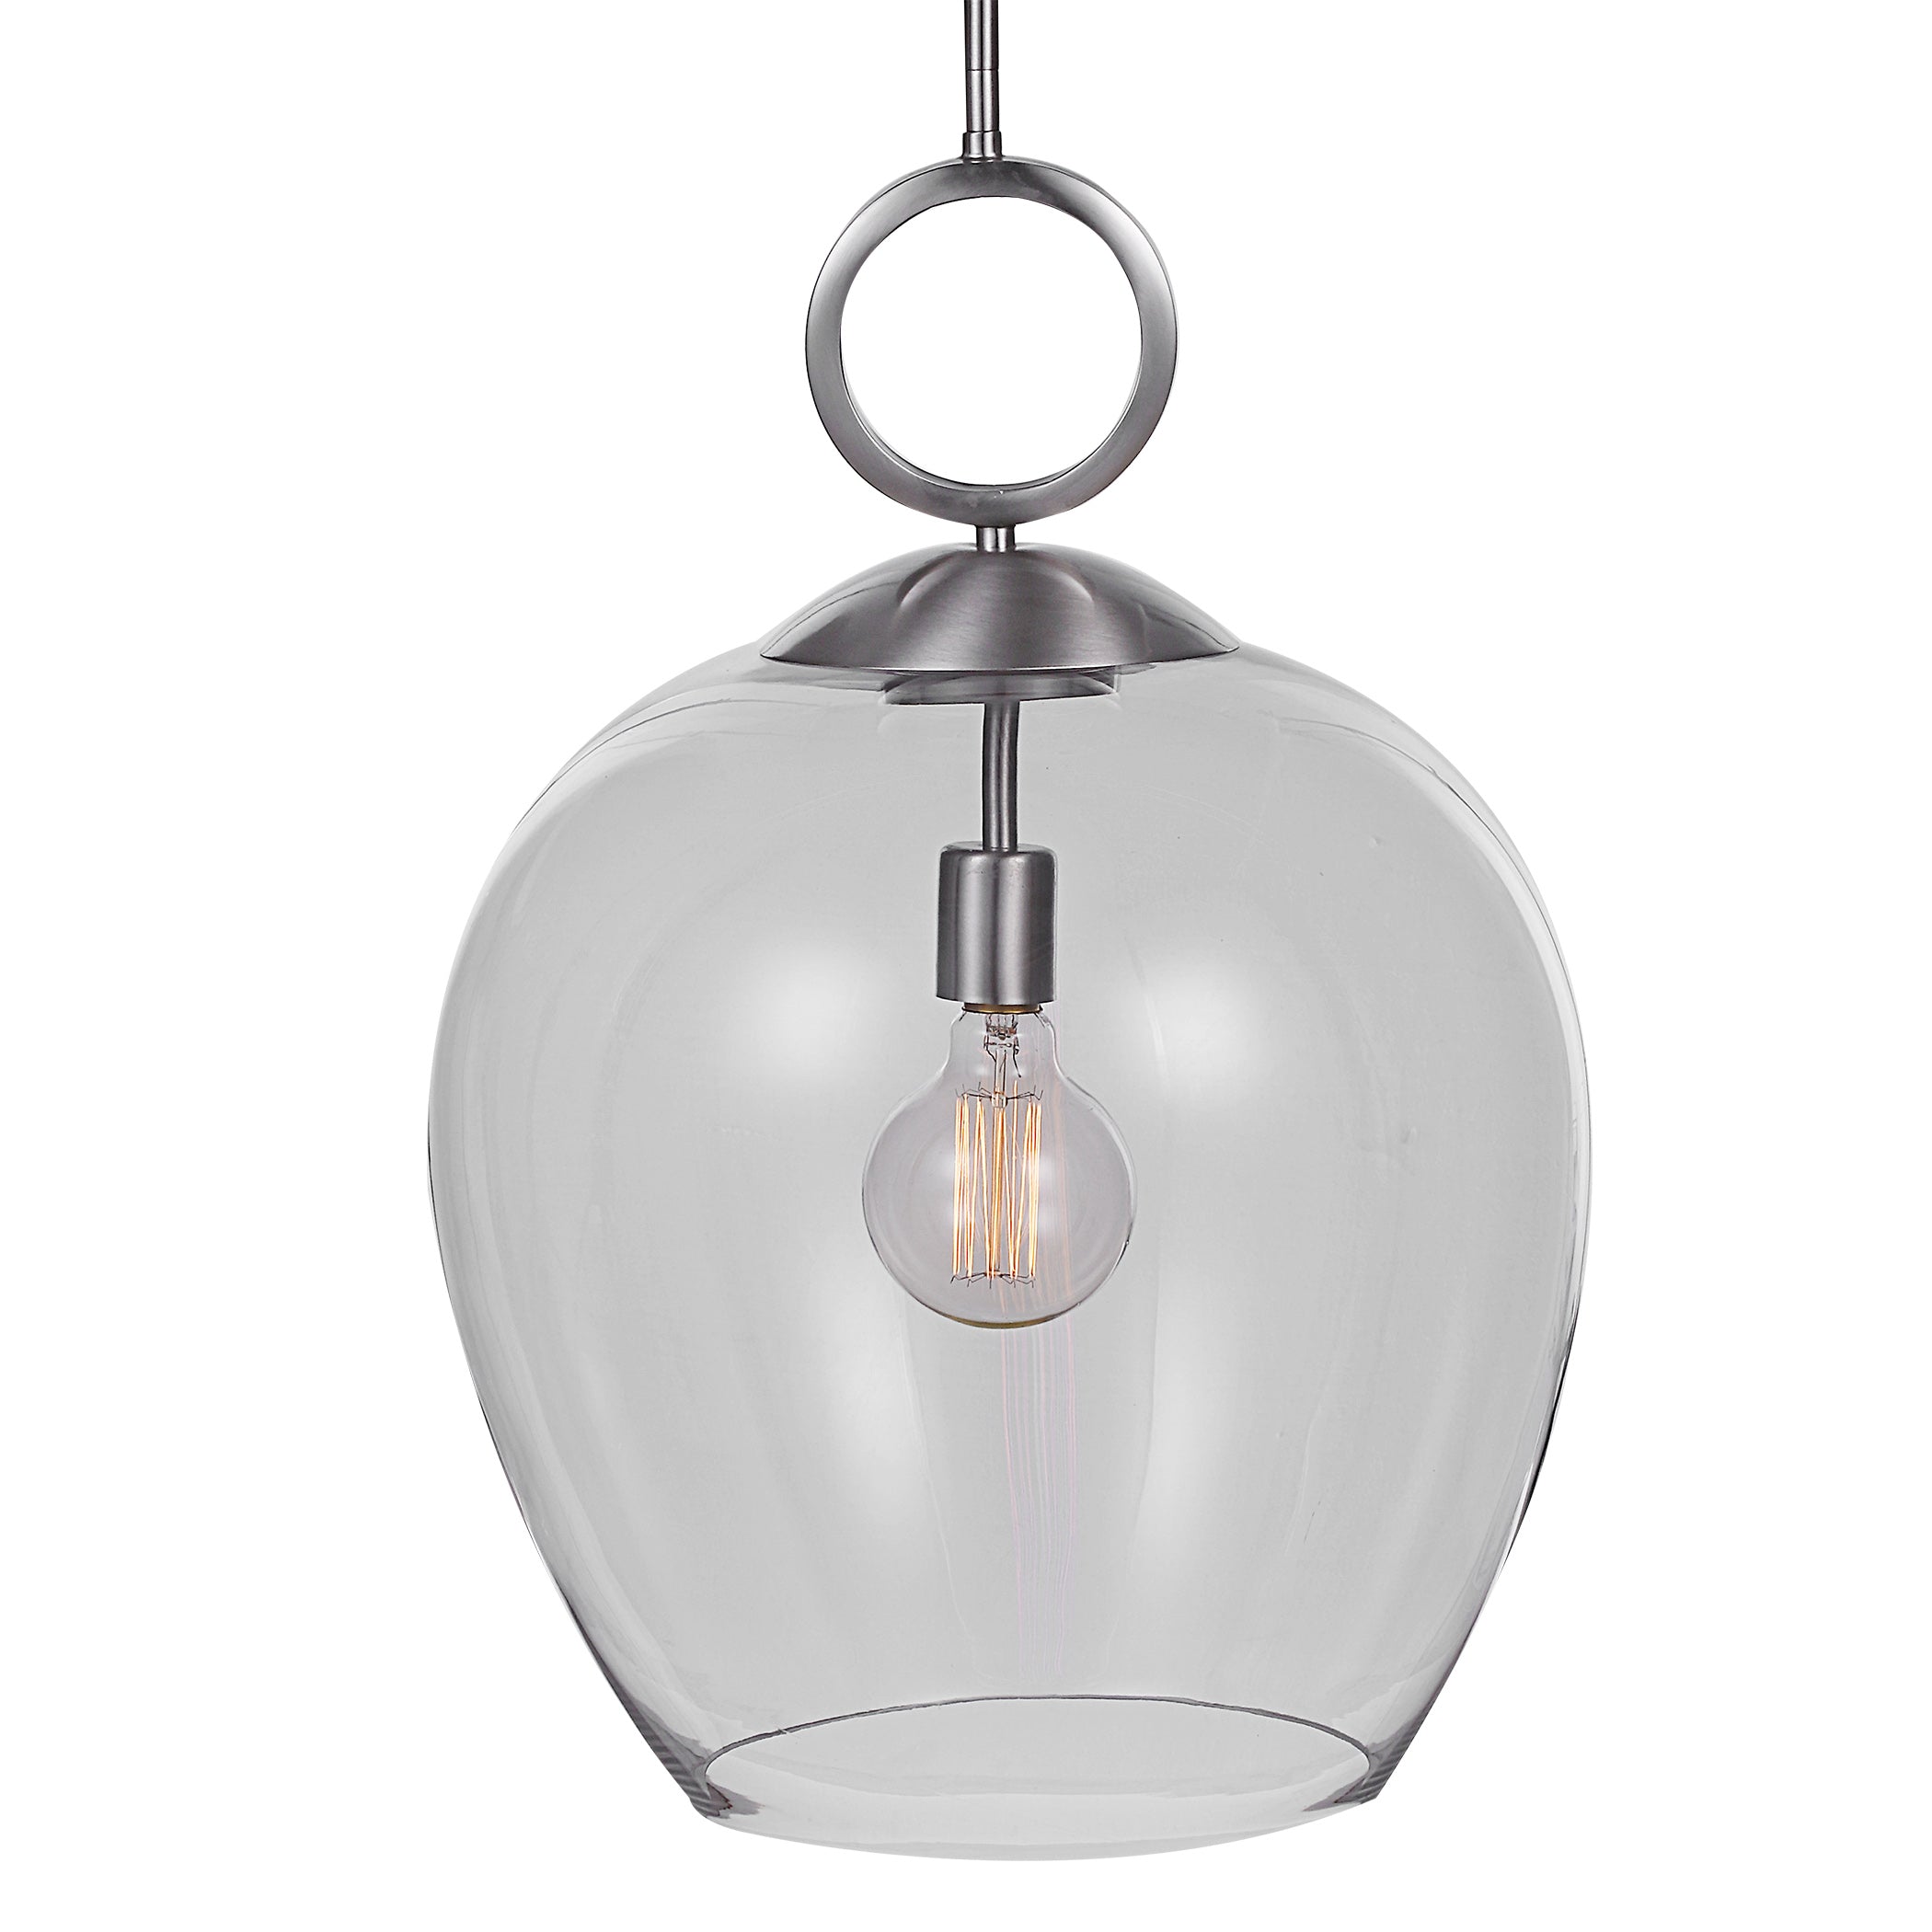 the-official-site-of-official-uttermost-22169-calix-nickel-1-light-glass-pendant-on-sale_5.jpg